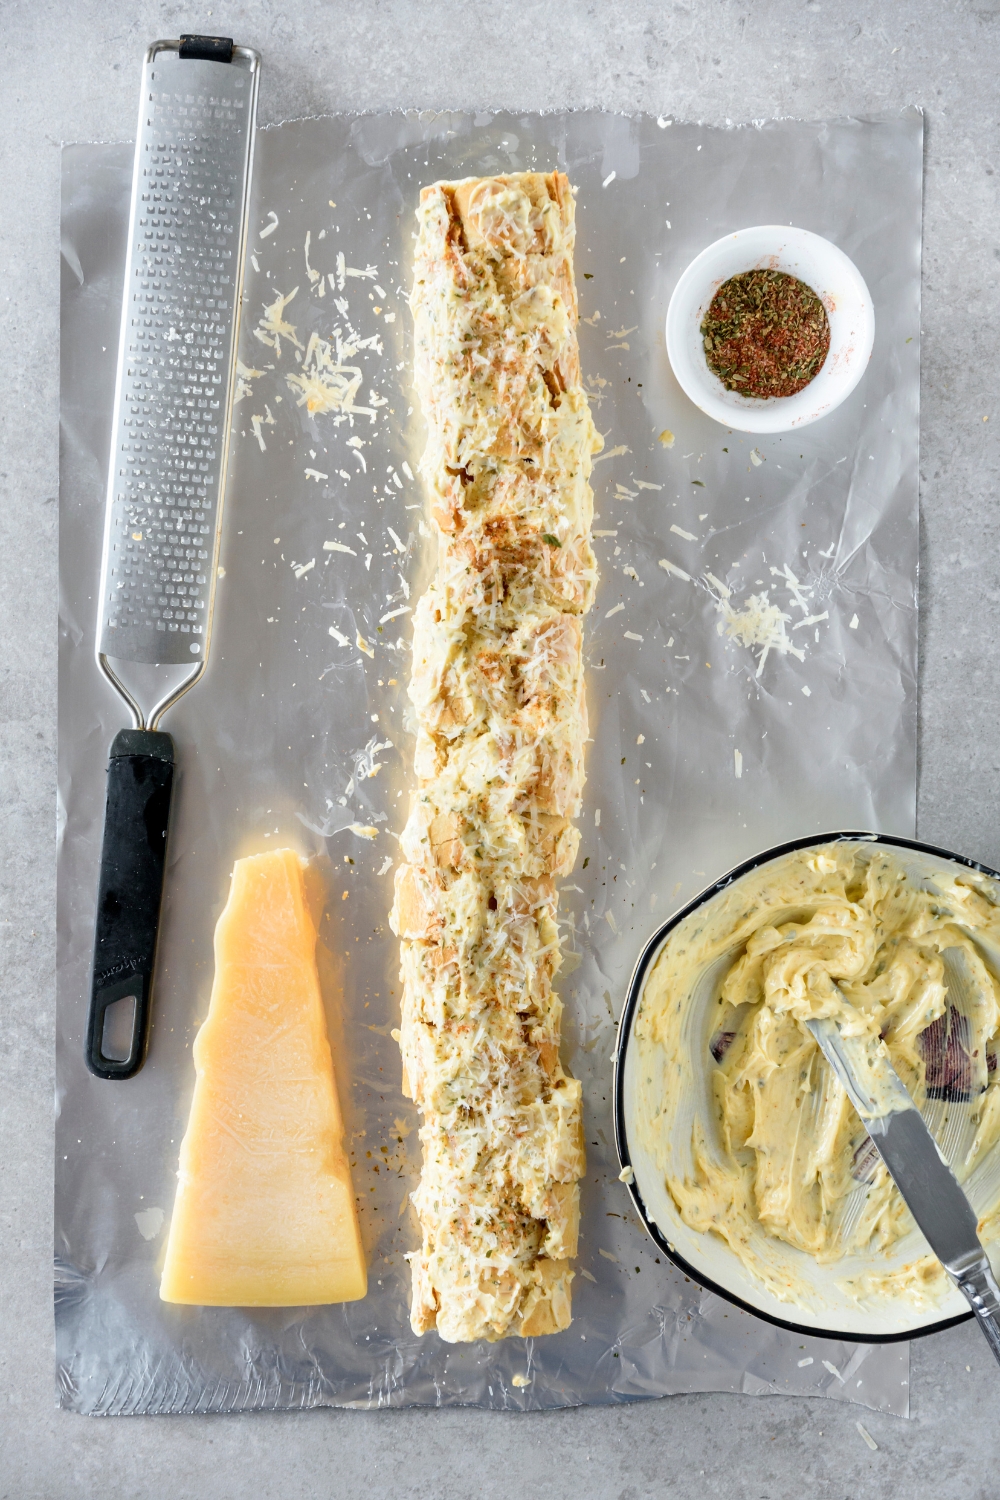 A baguette that's been cut into slices and covered in a seasoned butter mixture. The baguette has been sprinkled with seasonings and is on a sheet of foil next to a wedge of cheese and bowls of seasonings and butter.